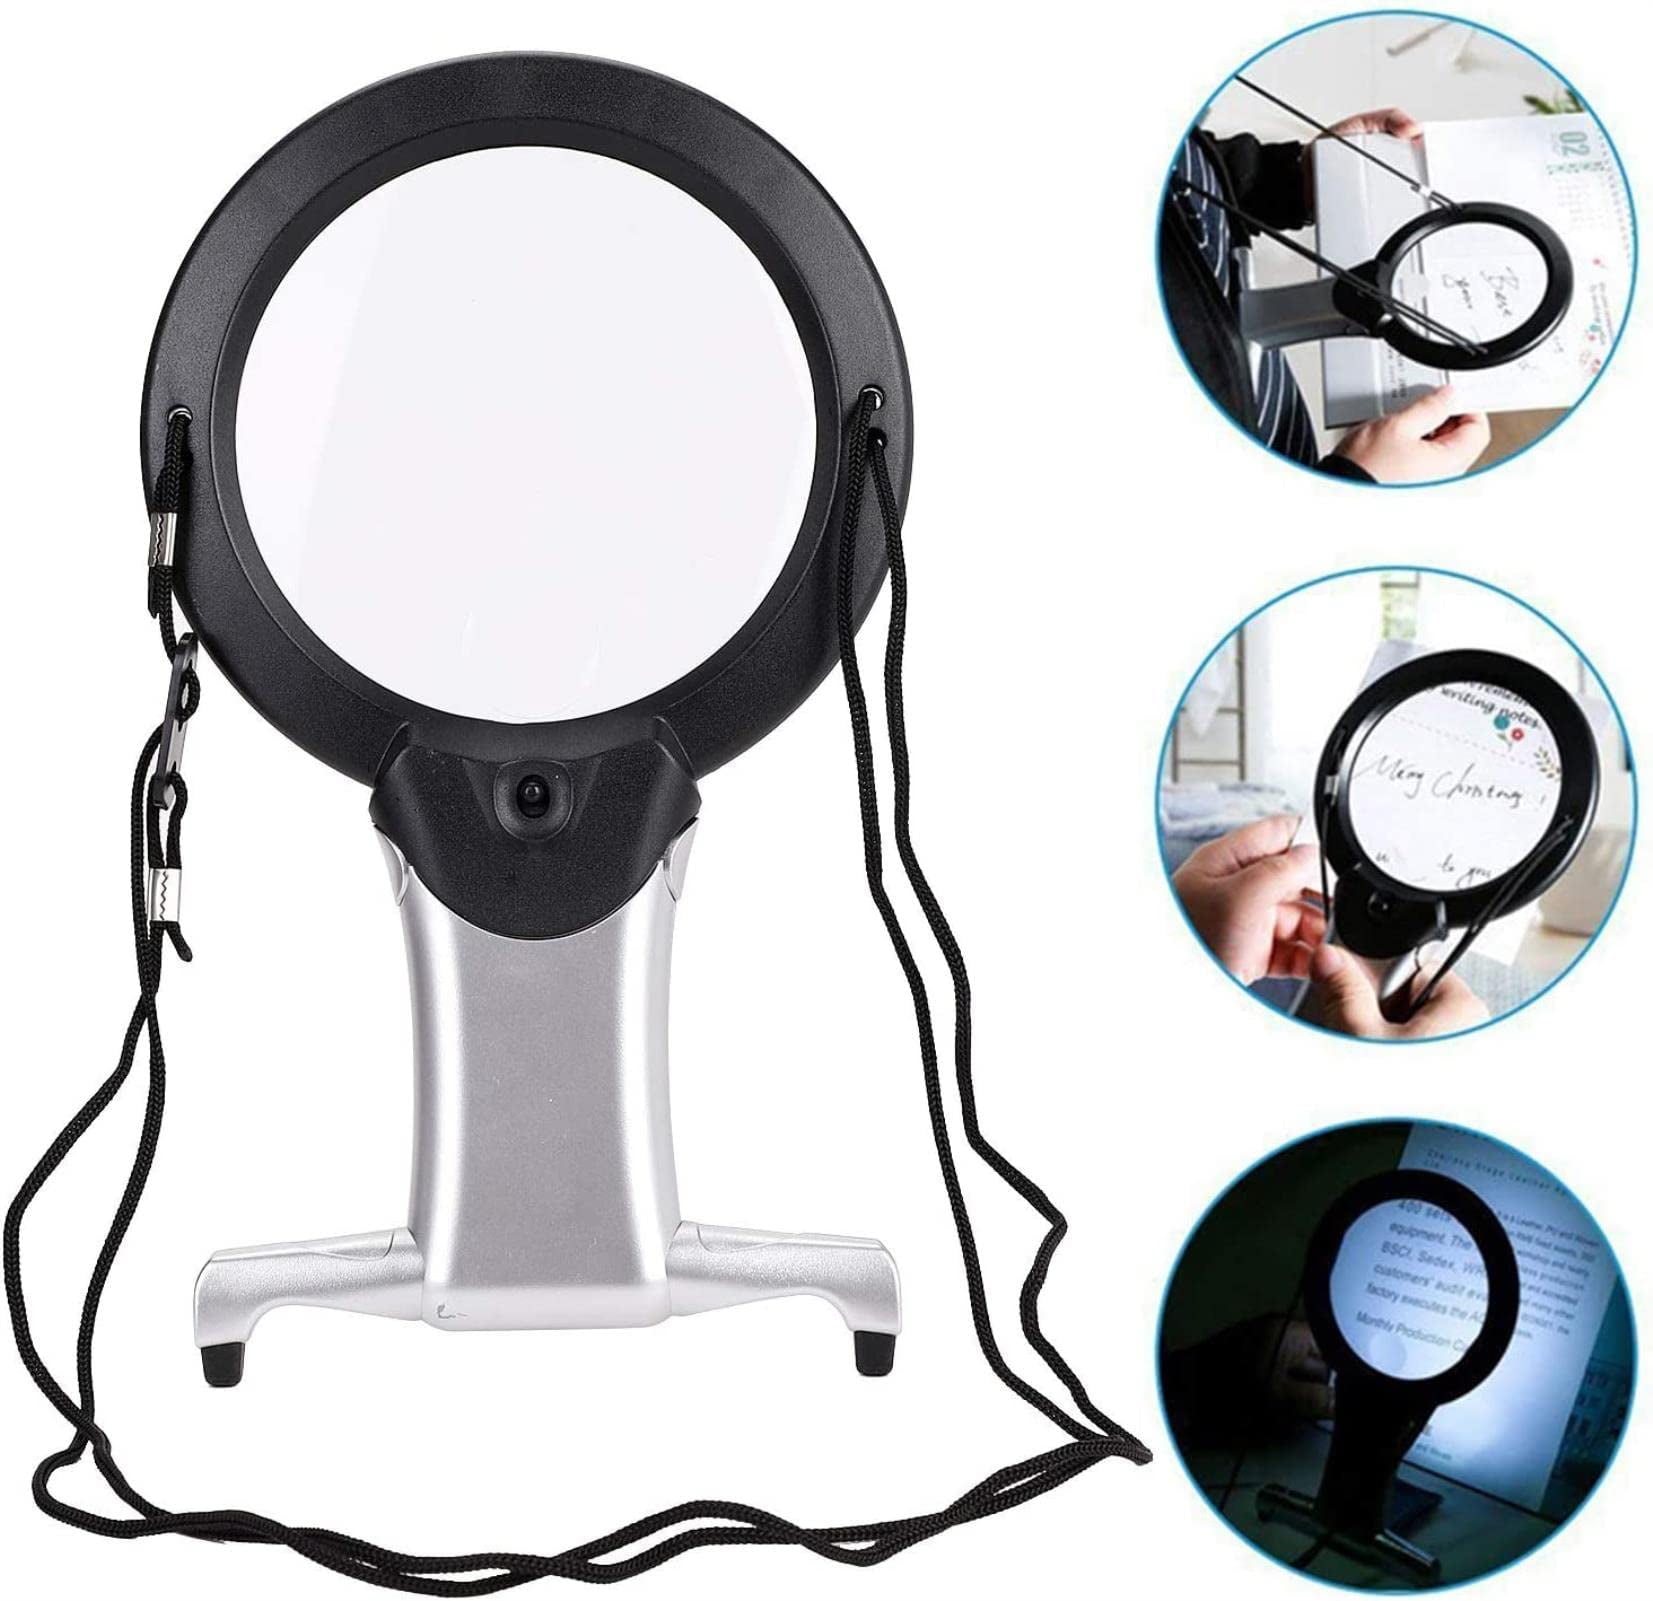 New 2 in 1 Hands Free Magnifying Glass With Light & Neck Cord LED